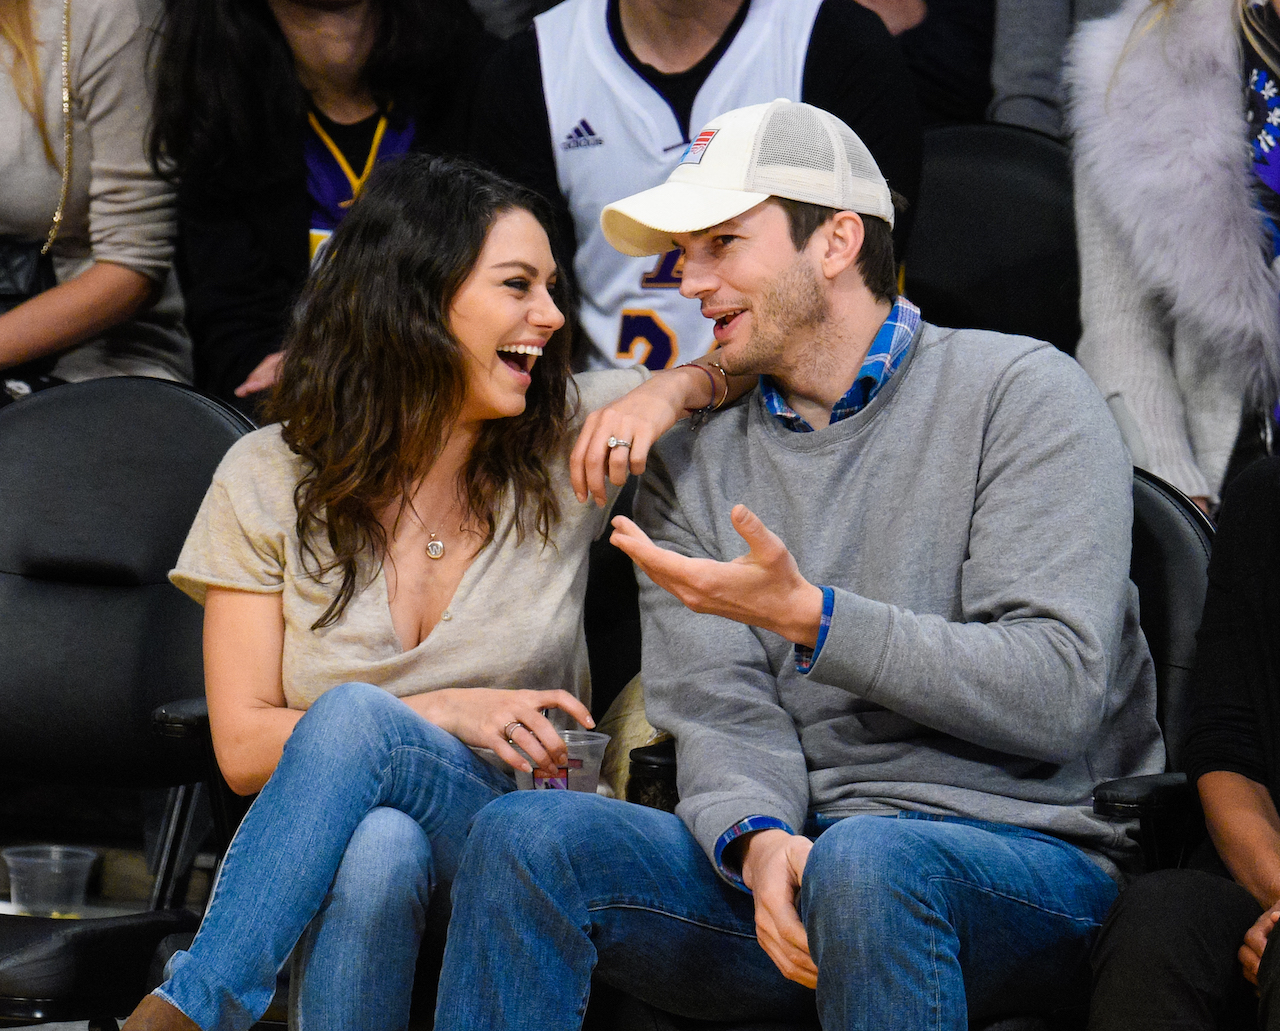 Mila Kunis and Ashton Kutcher pictured at a basketball game between the Oklahoma City Thunder and the Los Angeles Lakers at Staples Center on December 19, 2014, in Los Angeles, California.